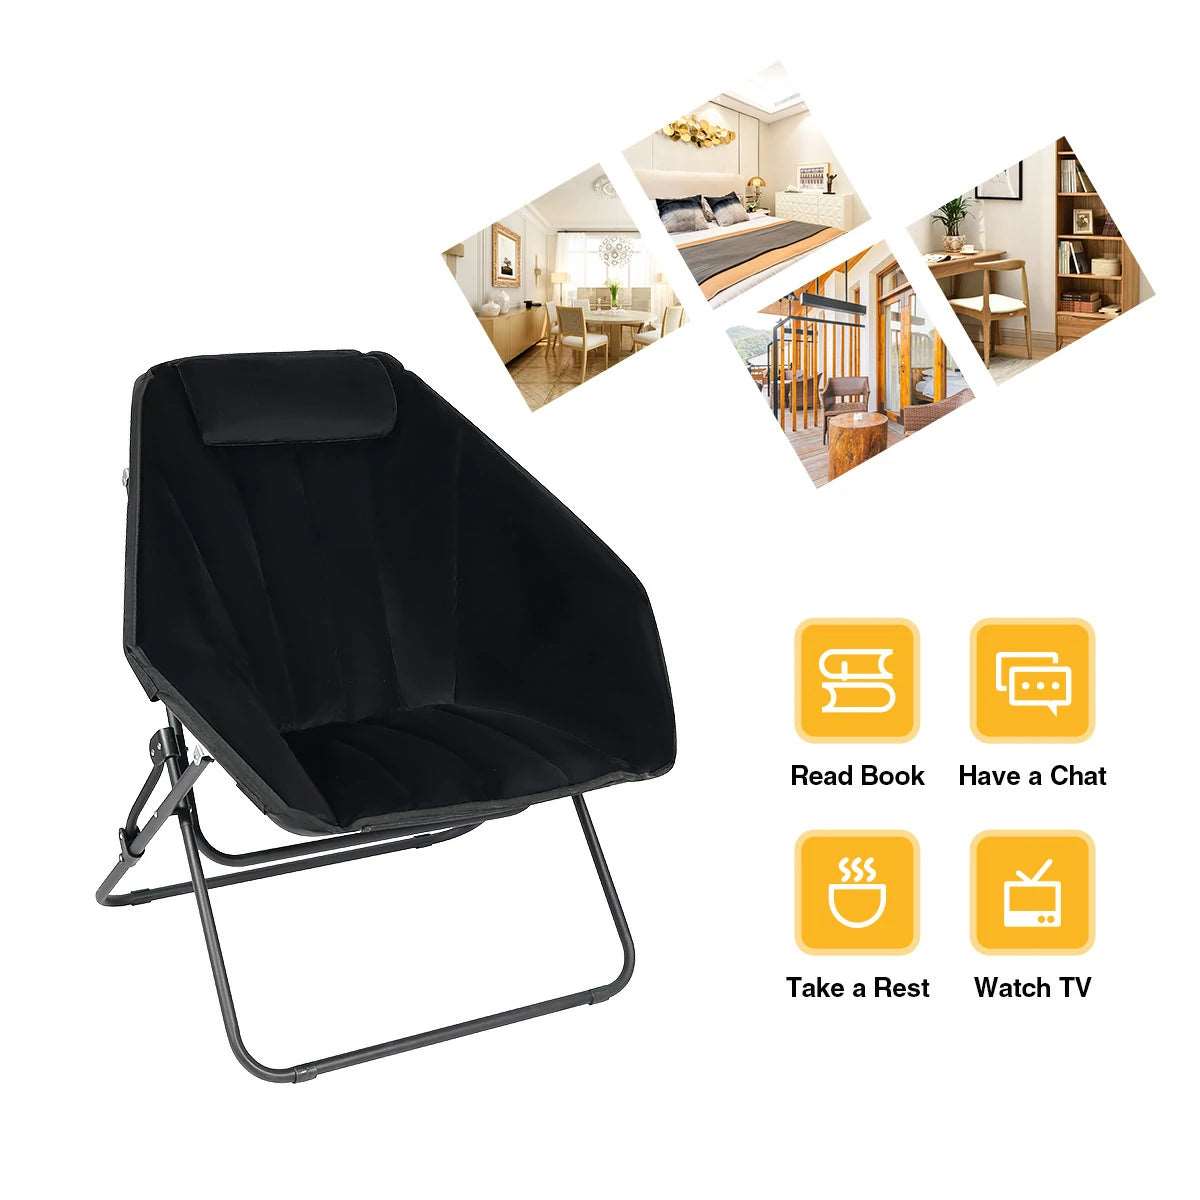 Oversized Folding Saucer Chairs for Adults